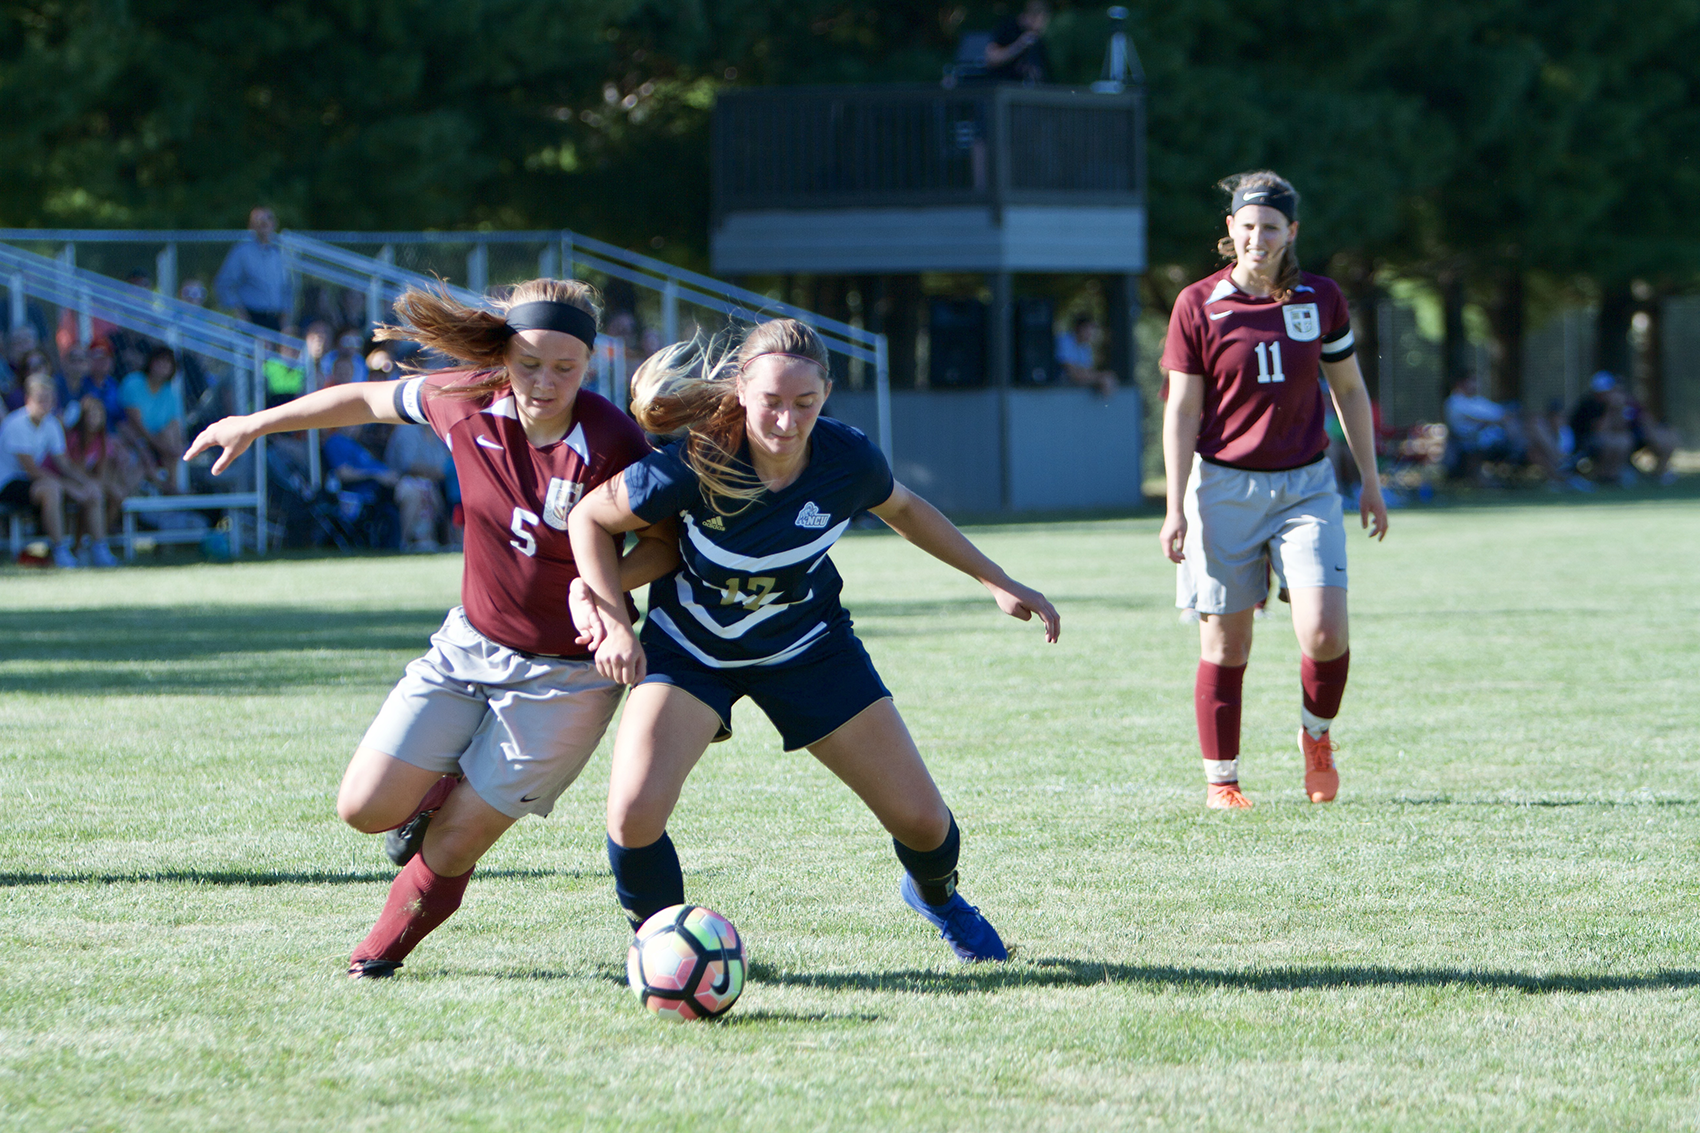 Lyndi Shepard battles for the ball against North Central University. Photo Credit: Rebecca White